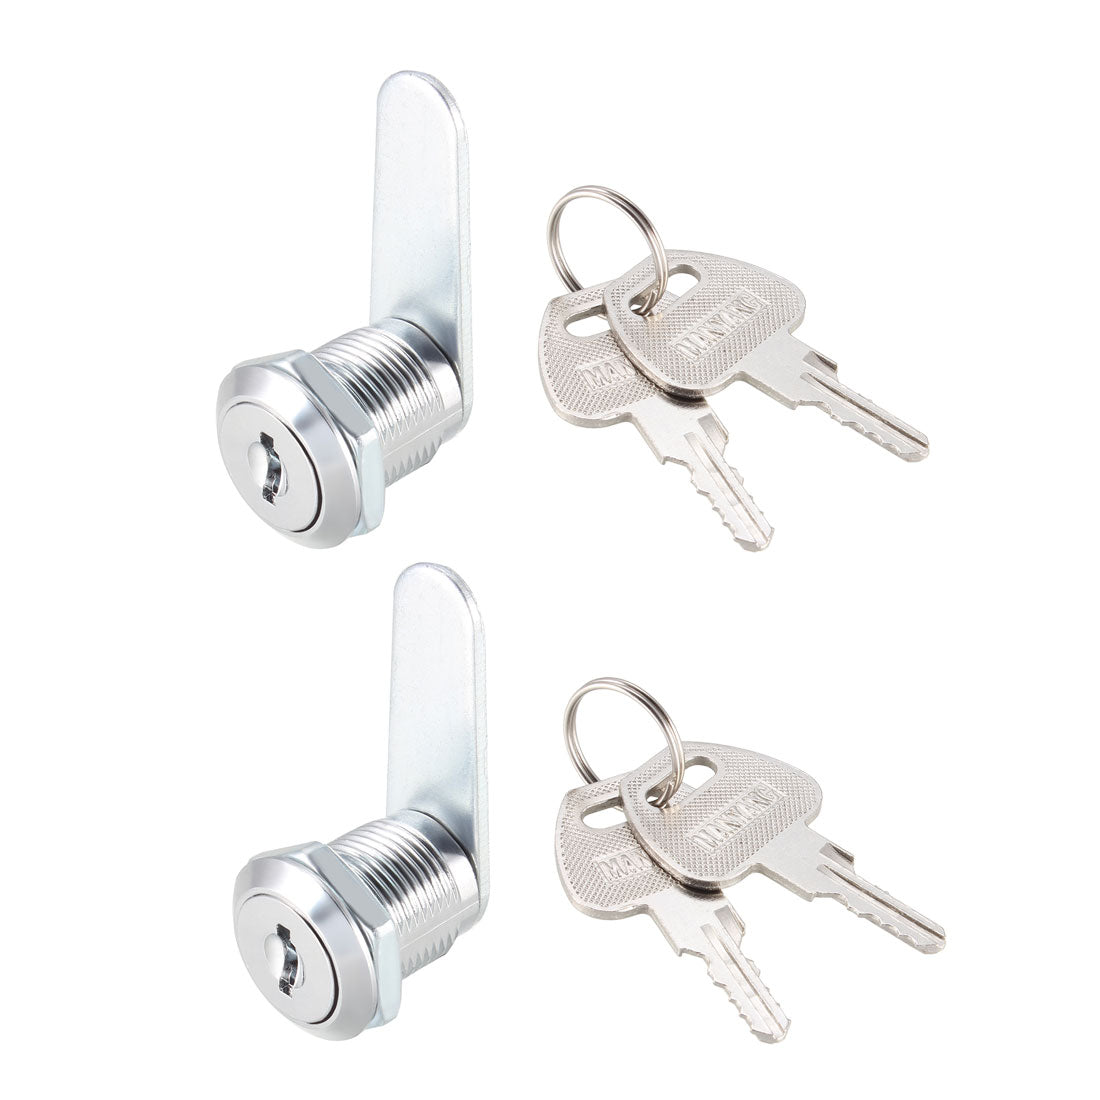 uxcell Uxcell Cam Locks 20mm Cylinder Length Fits Max 1/2-inch Panel Keyed Different 2Pcs